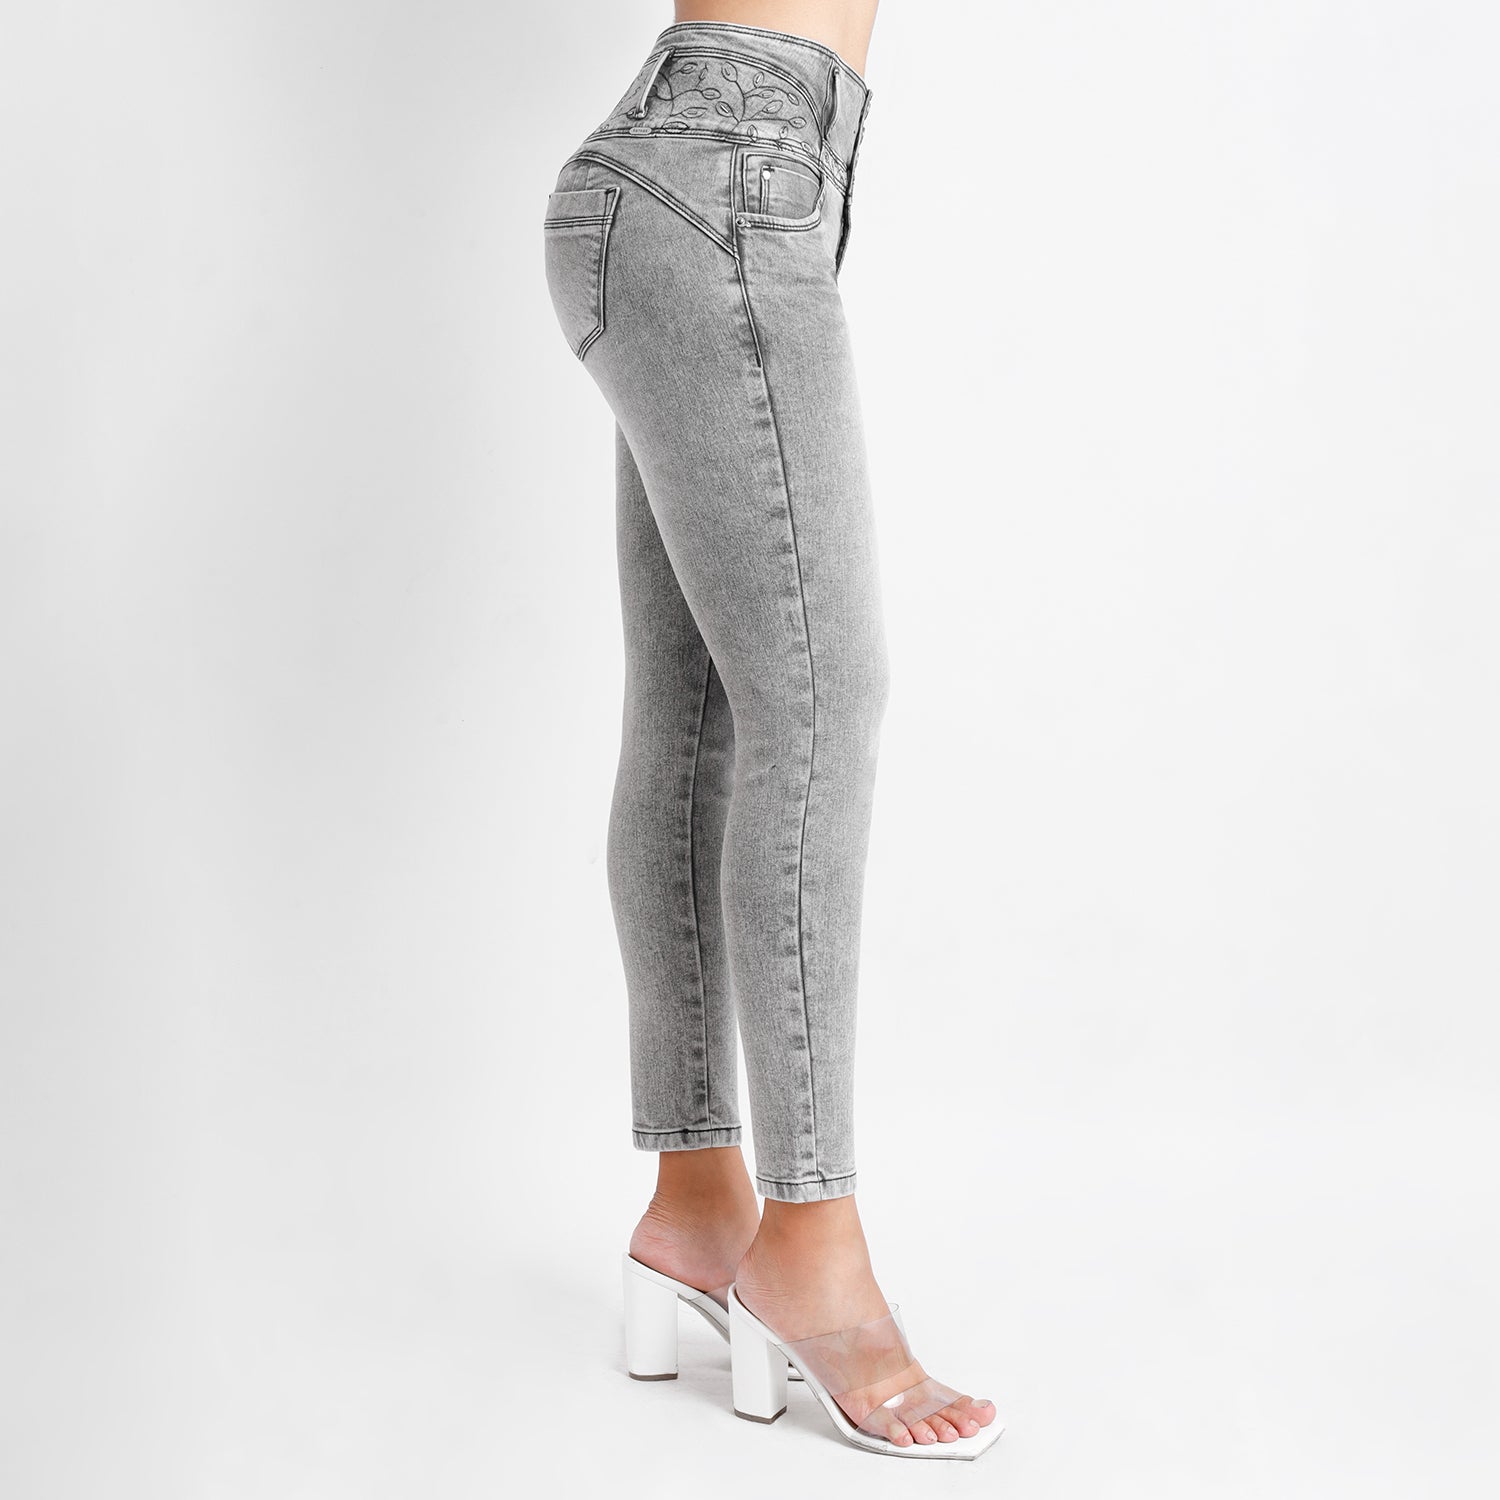 Jean mujer gris